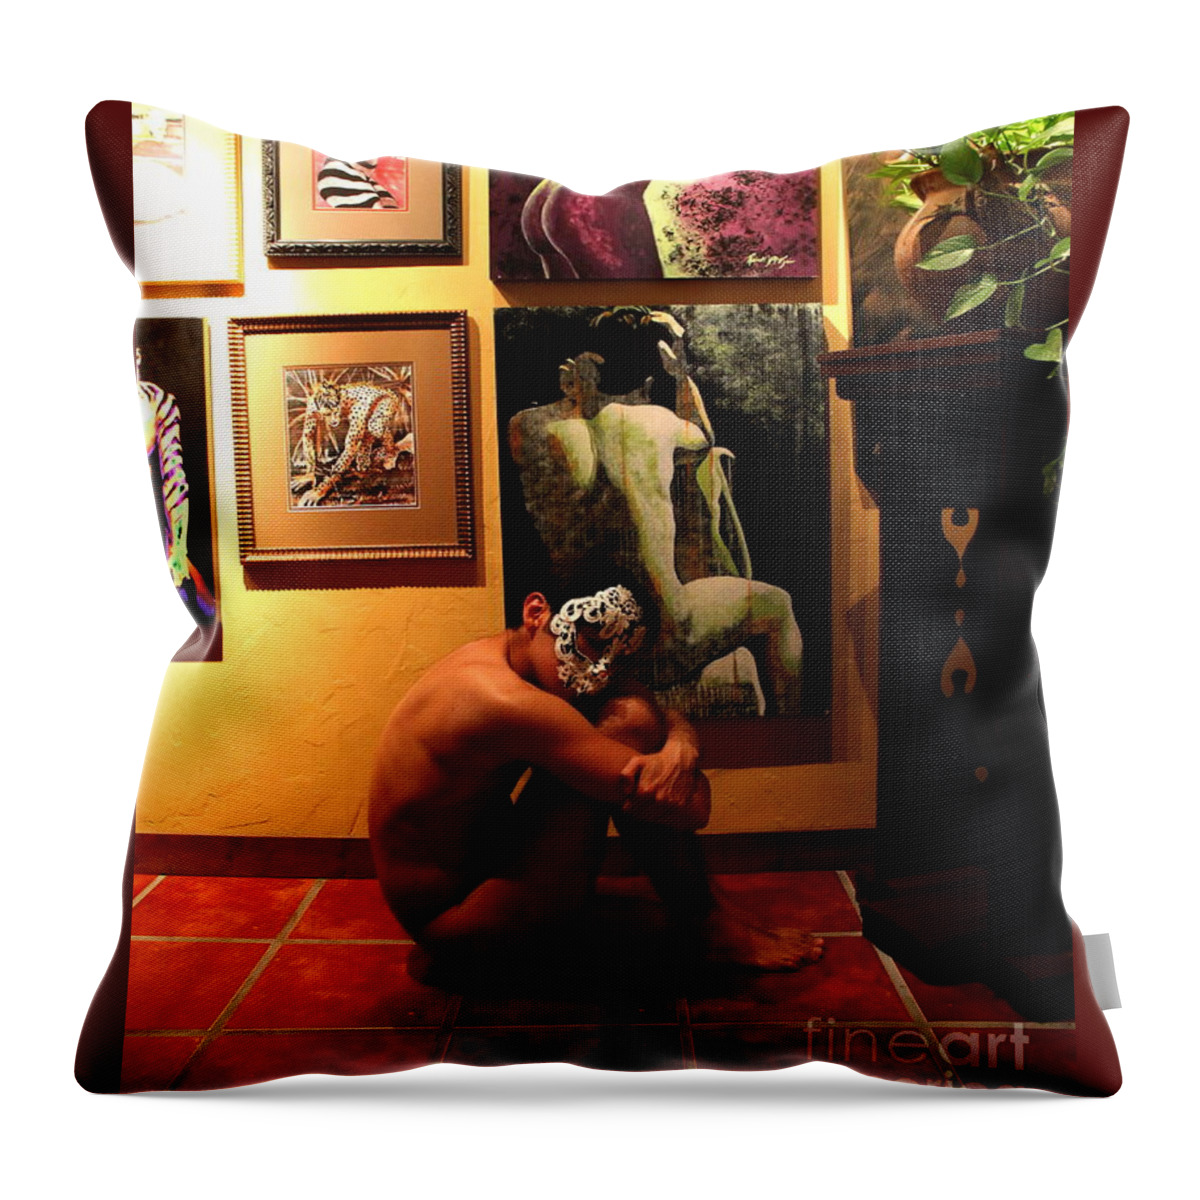 Seated Nude Throw Pillow featuring the photograph On the Gallery Wall by Robert D McBain